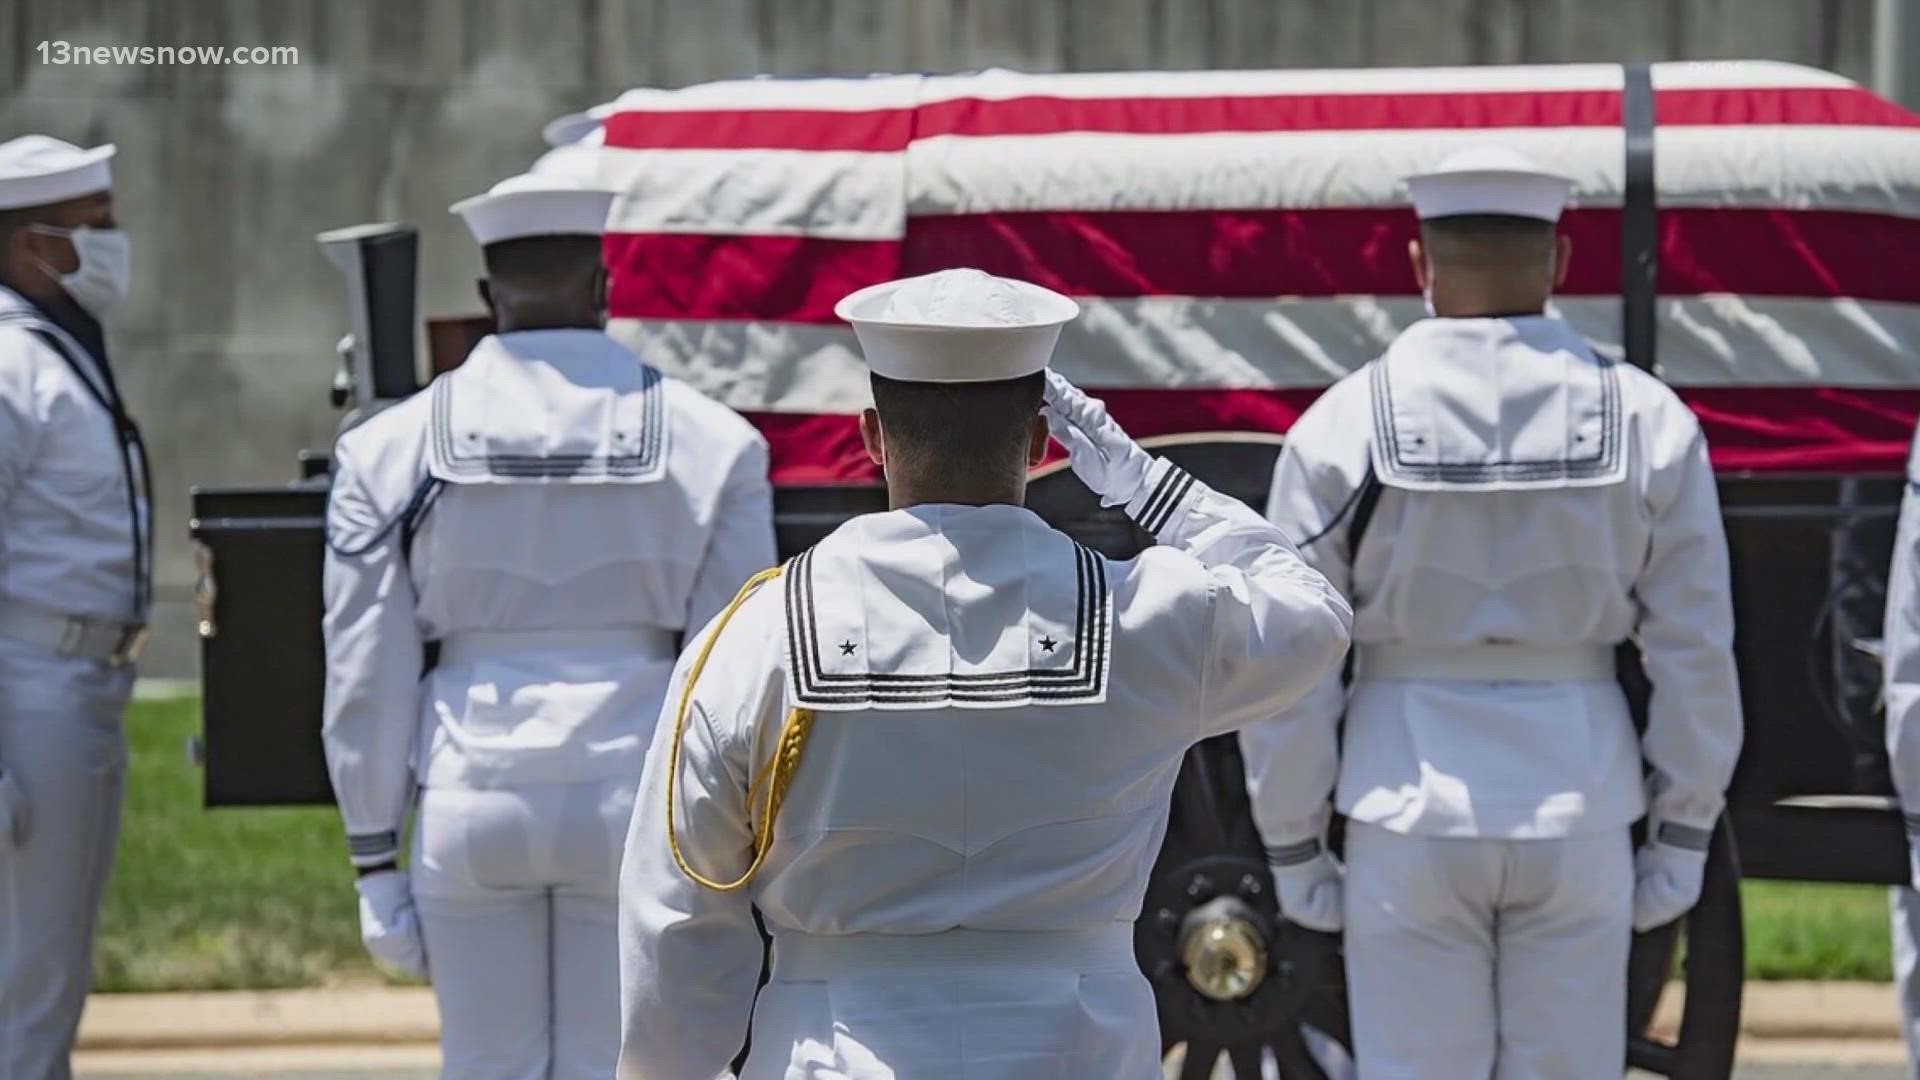 Virginia lawmakers are seeking answers and demanding accountability after four Navy sailors died by apparent suicide in less than a month.